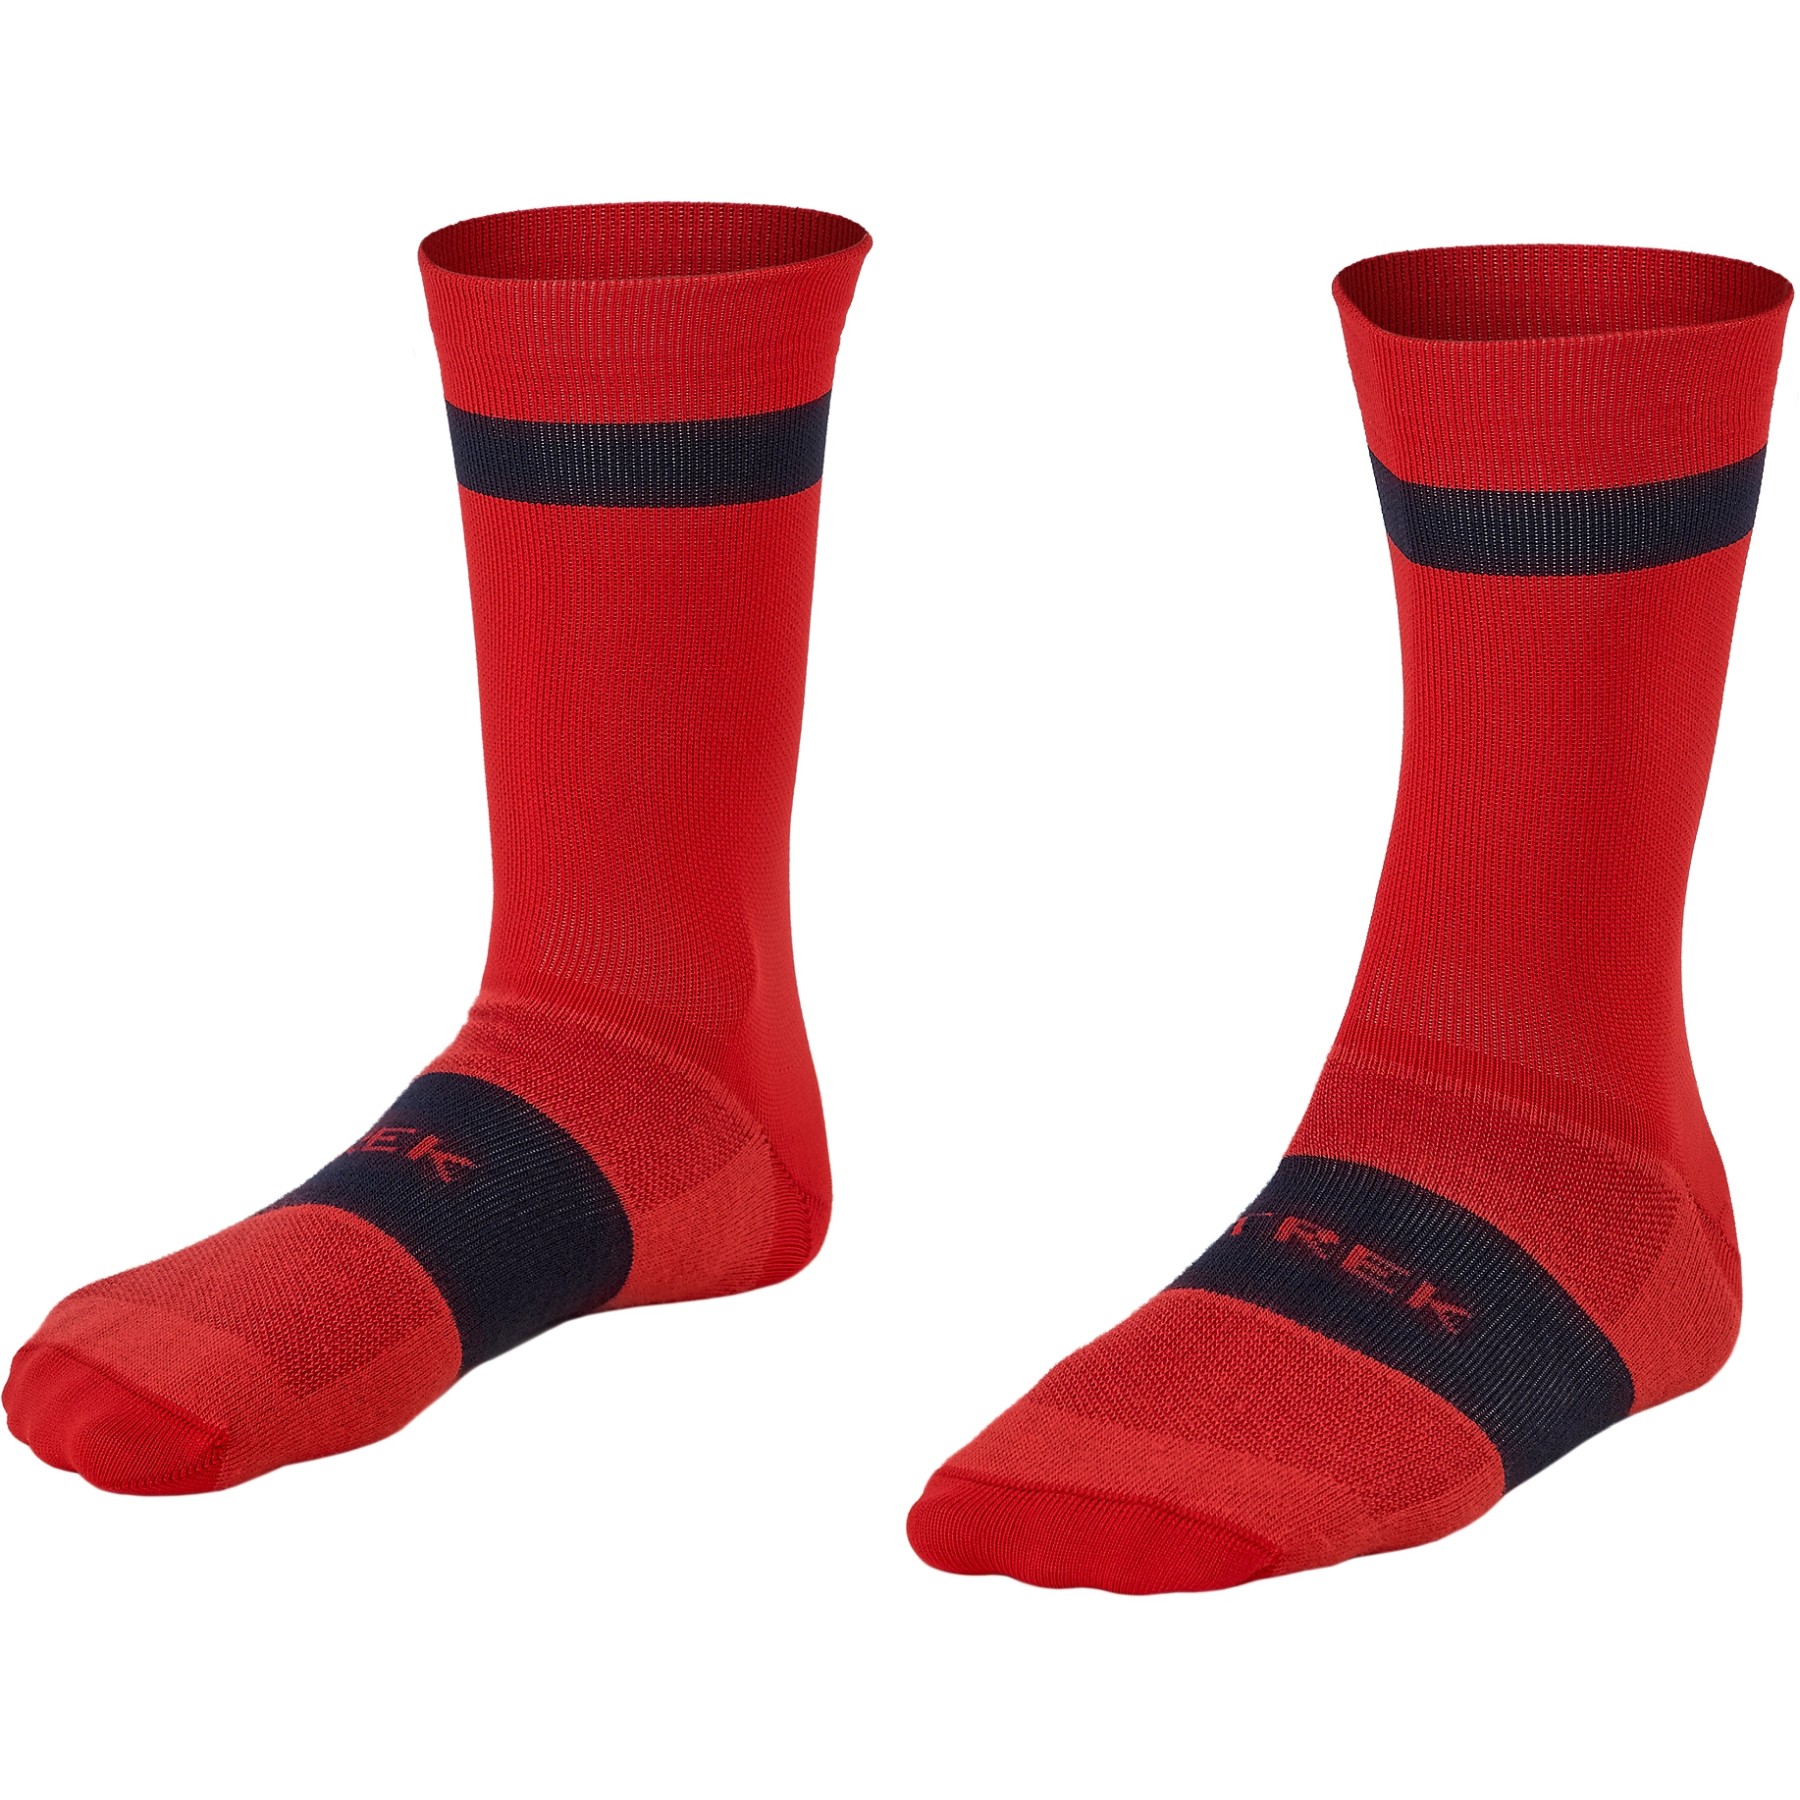 Picture of Trek Race Crew Cycling Socks - Viper Red